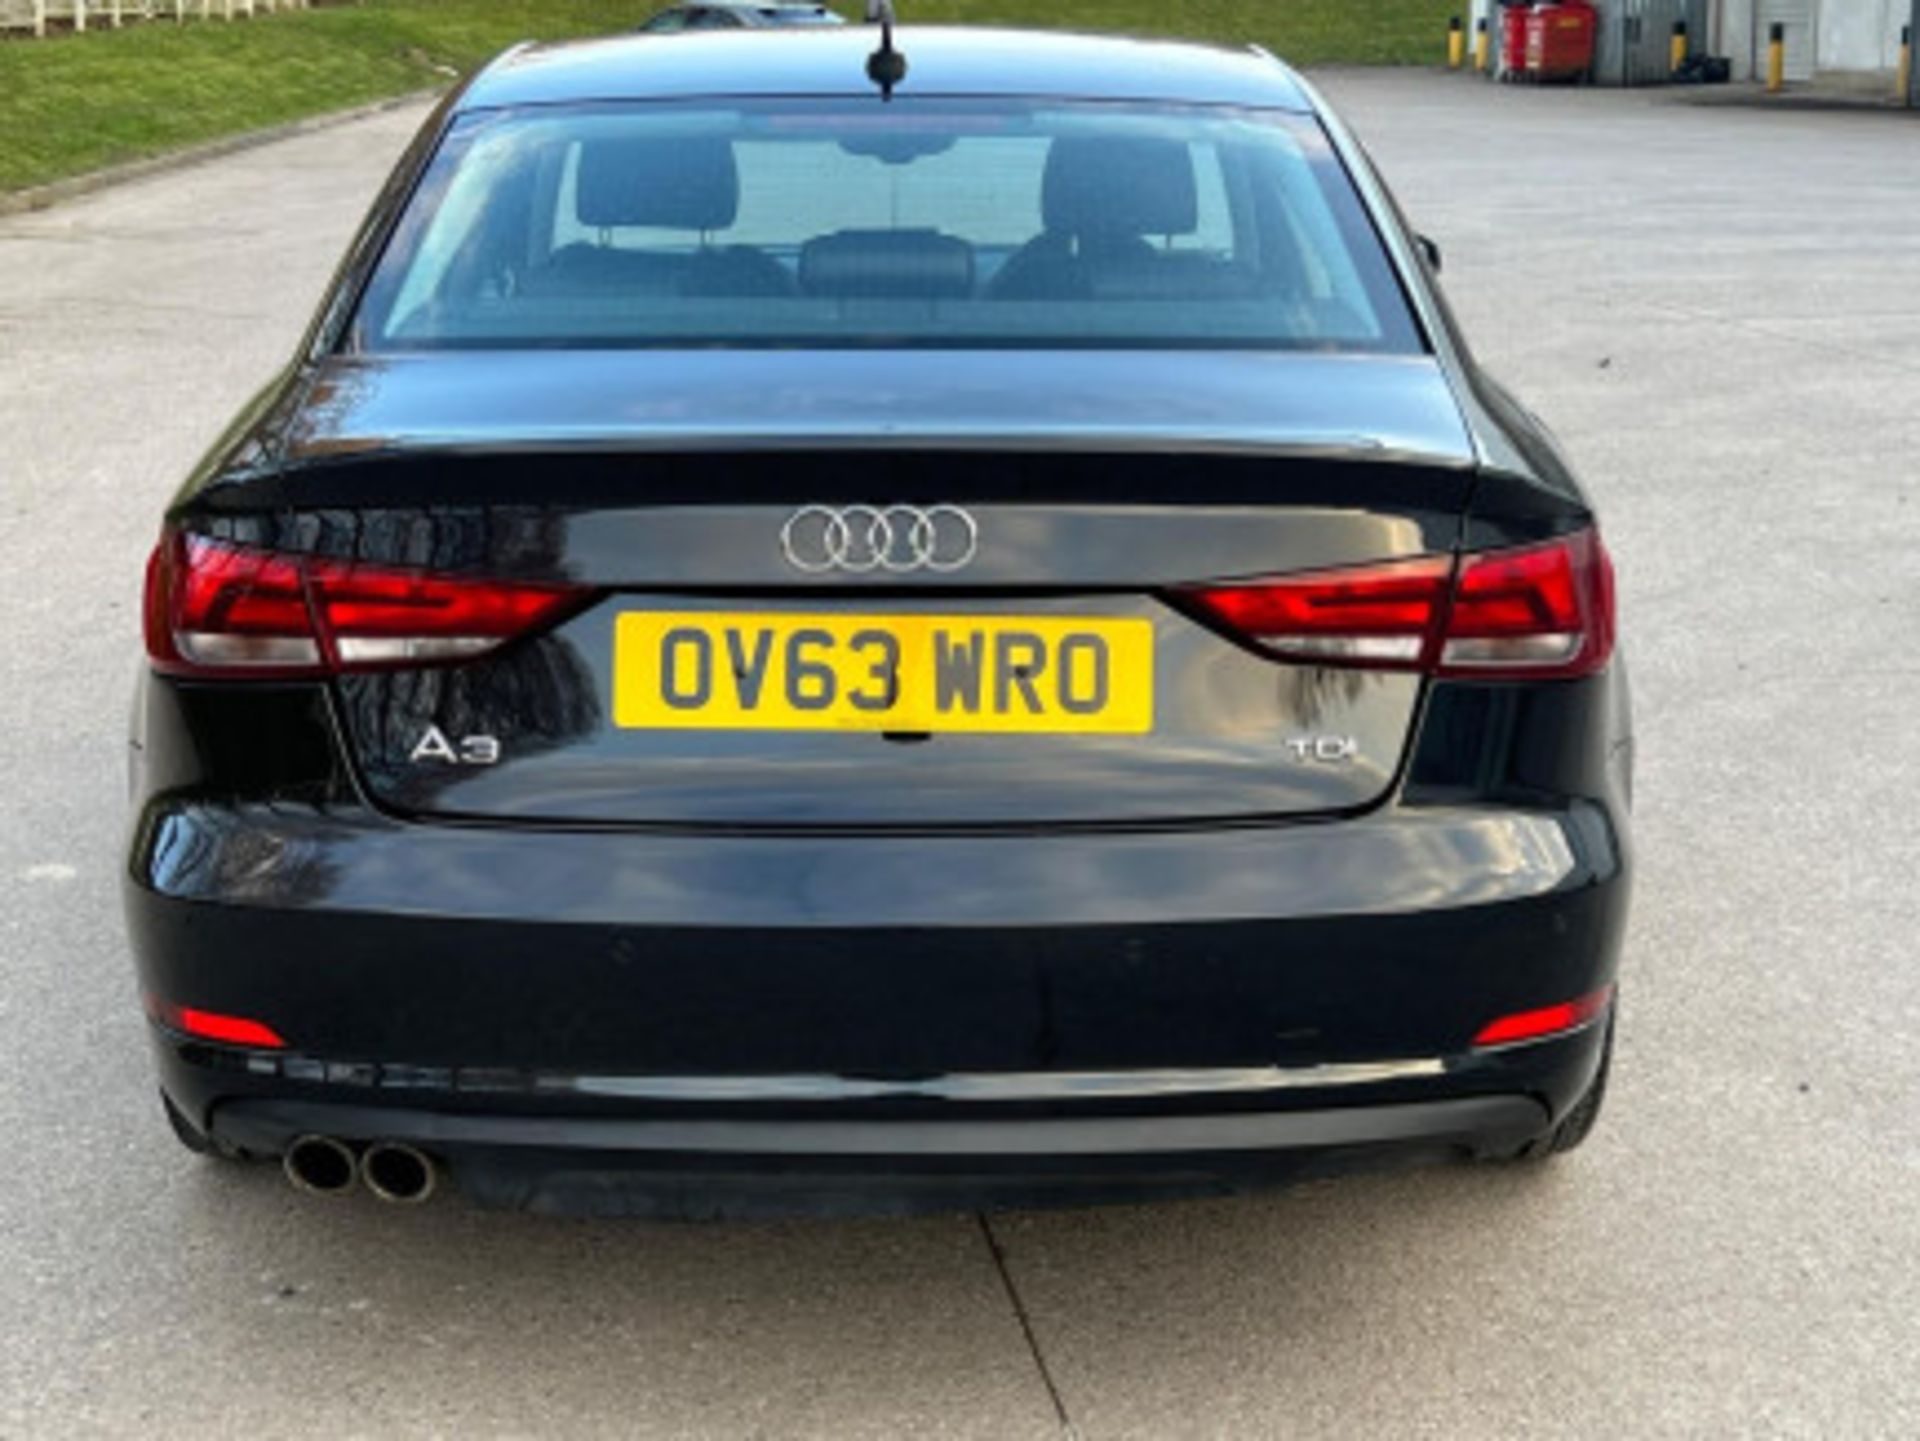 AUDI A3 2.0TDI SPORTBACK - STYLE, PERFORMANCE, AND COMFORT COMBINED >>--NO VAT ON HAMMER--<< - Image 5 of 216